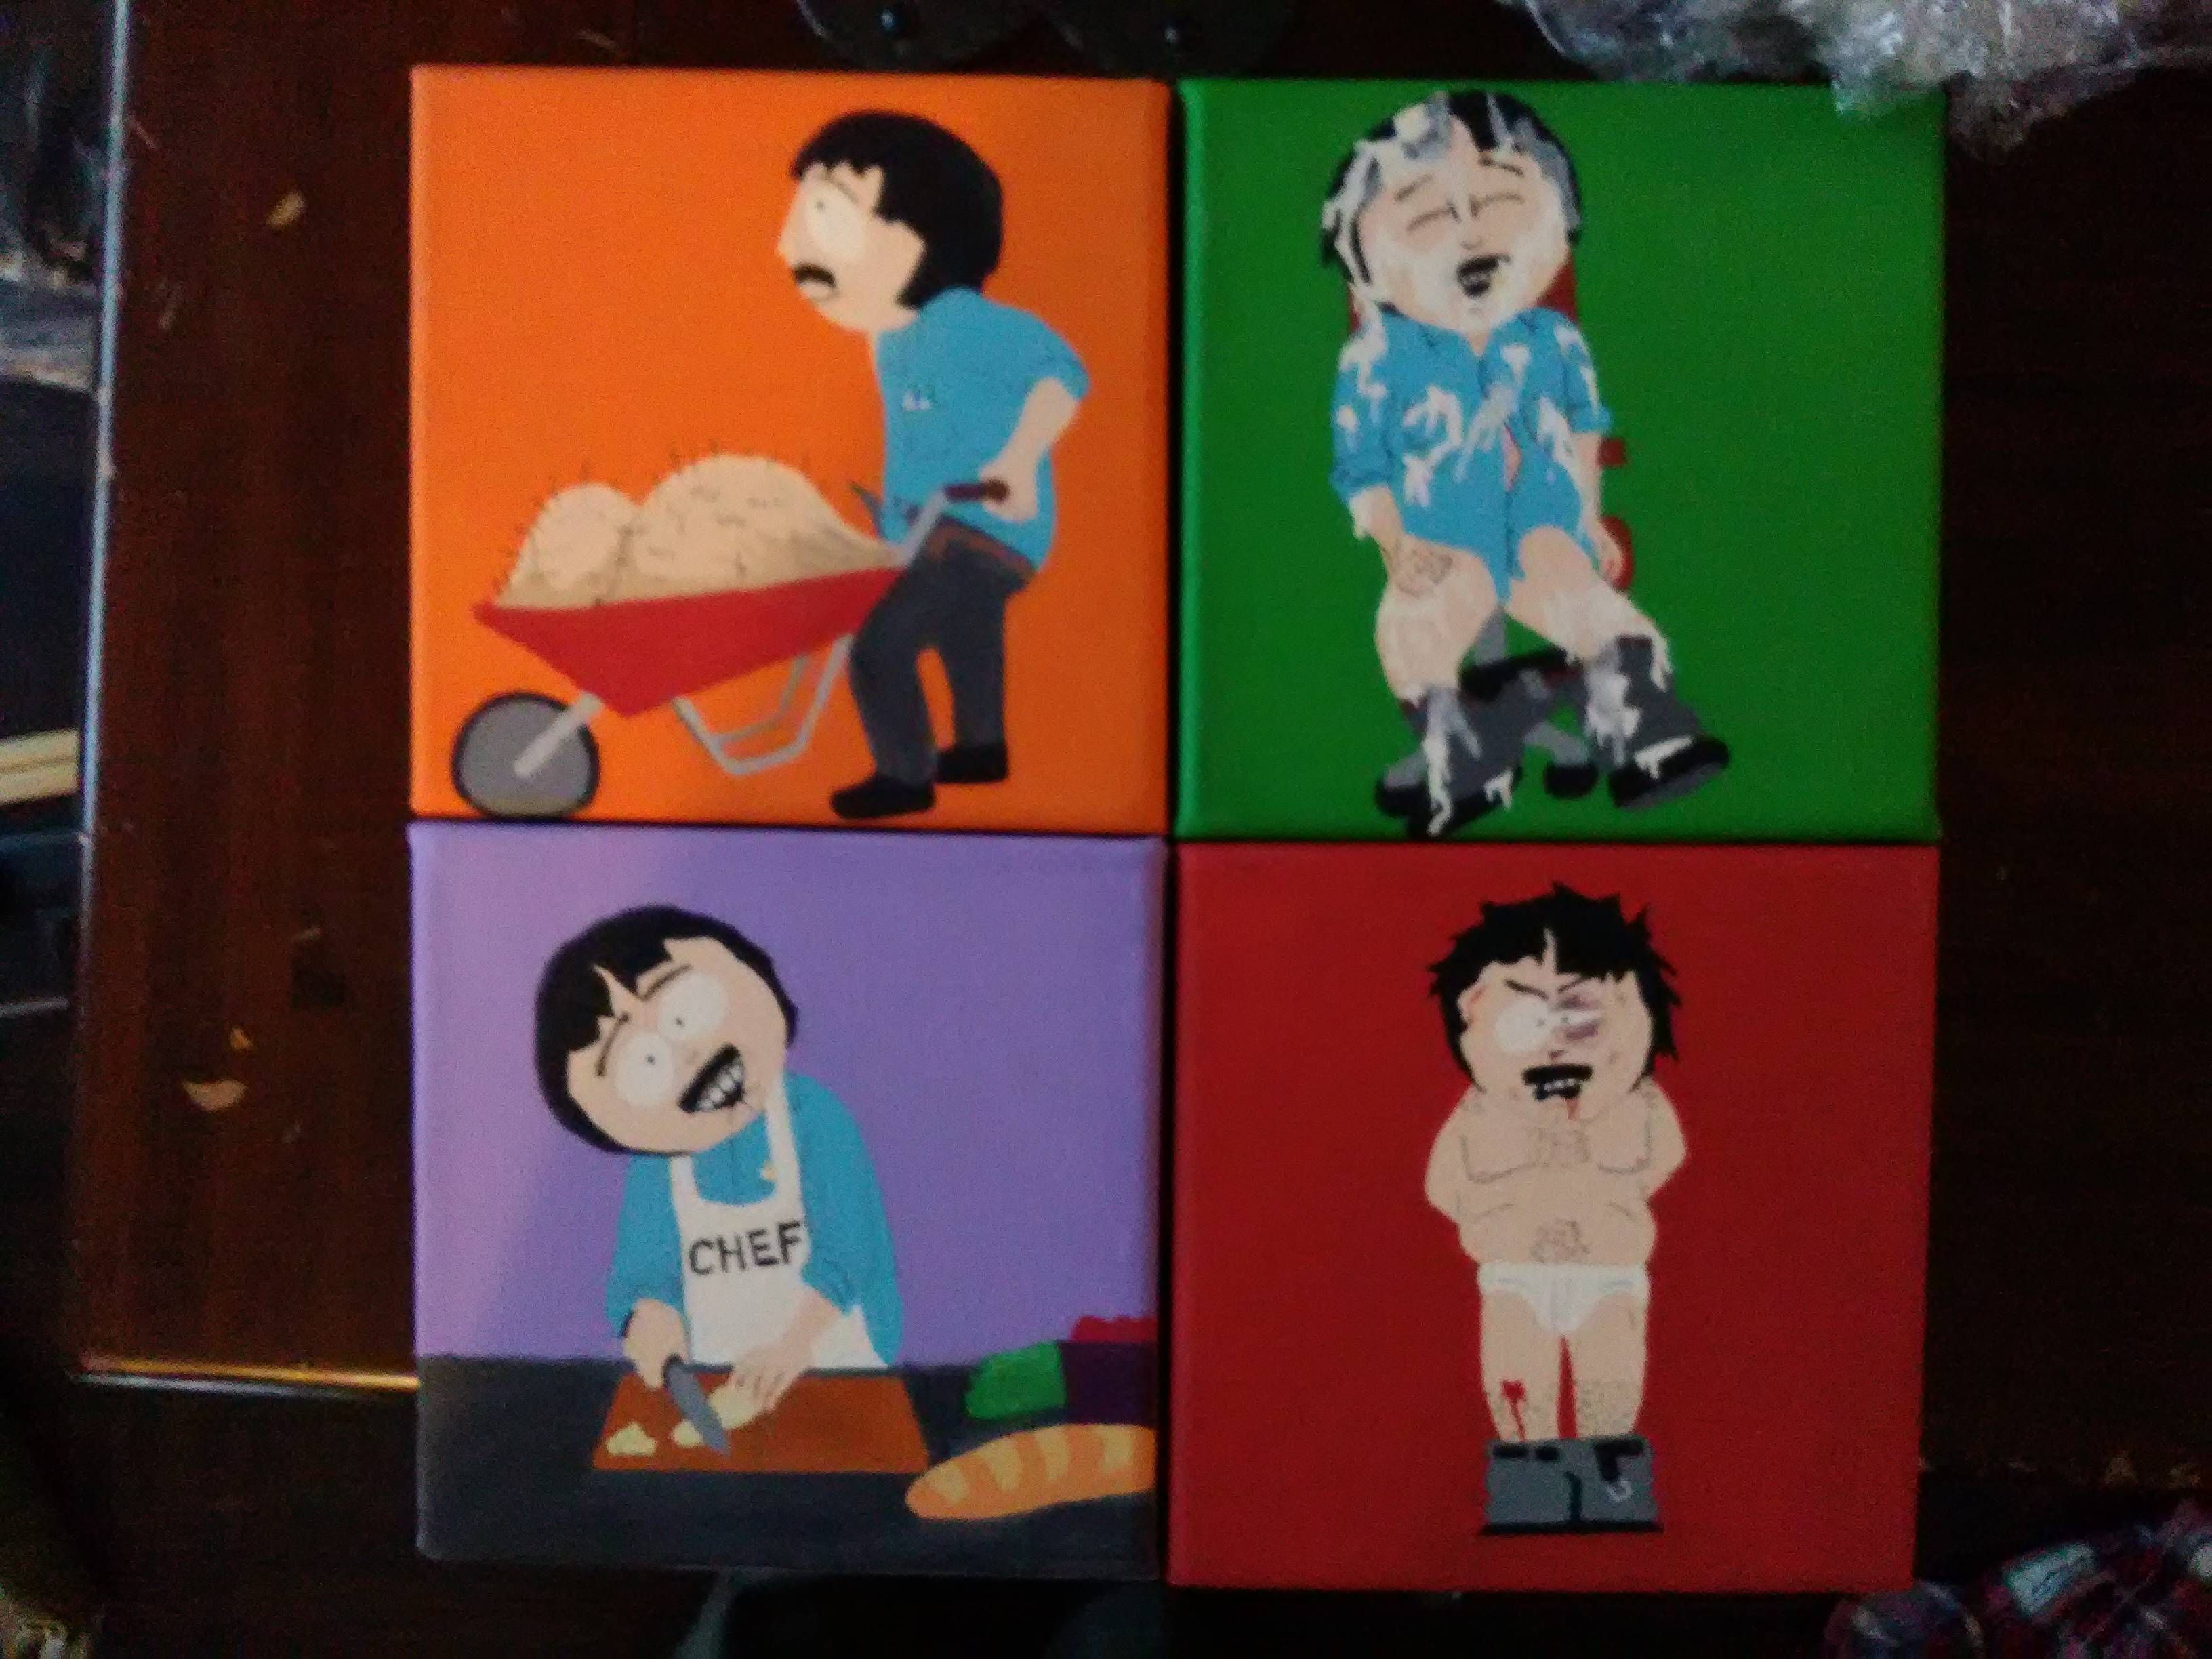 I gave my brothers paintings of Randy Marsh for Christmas.